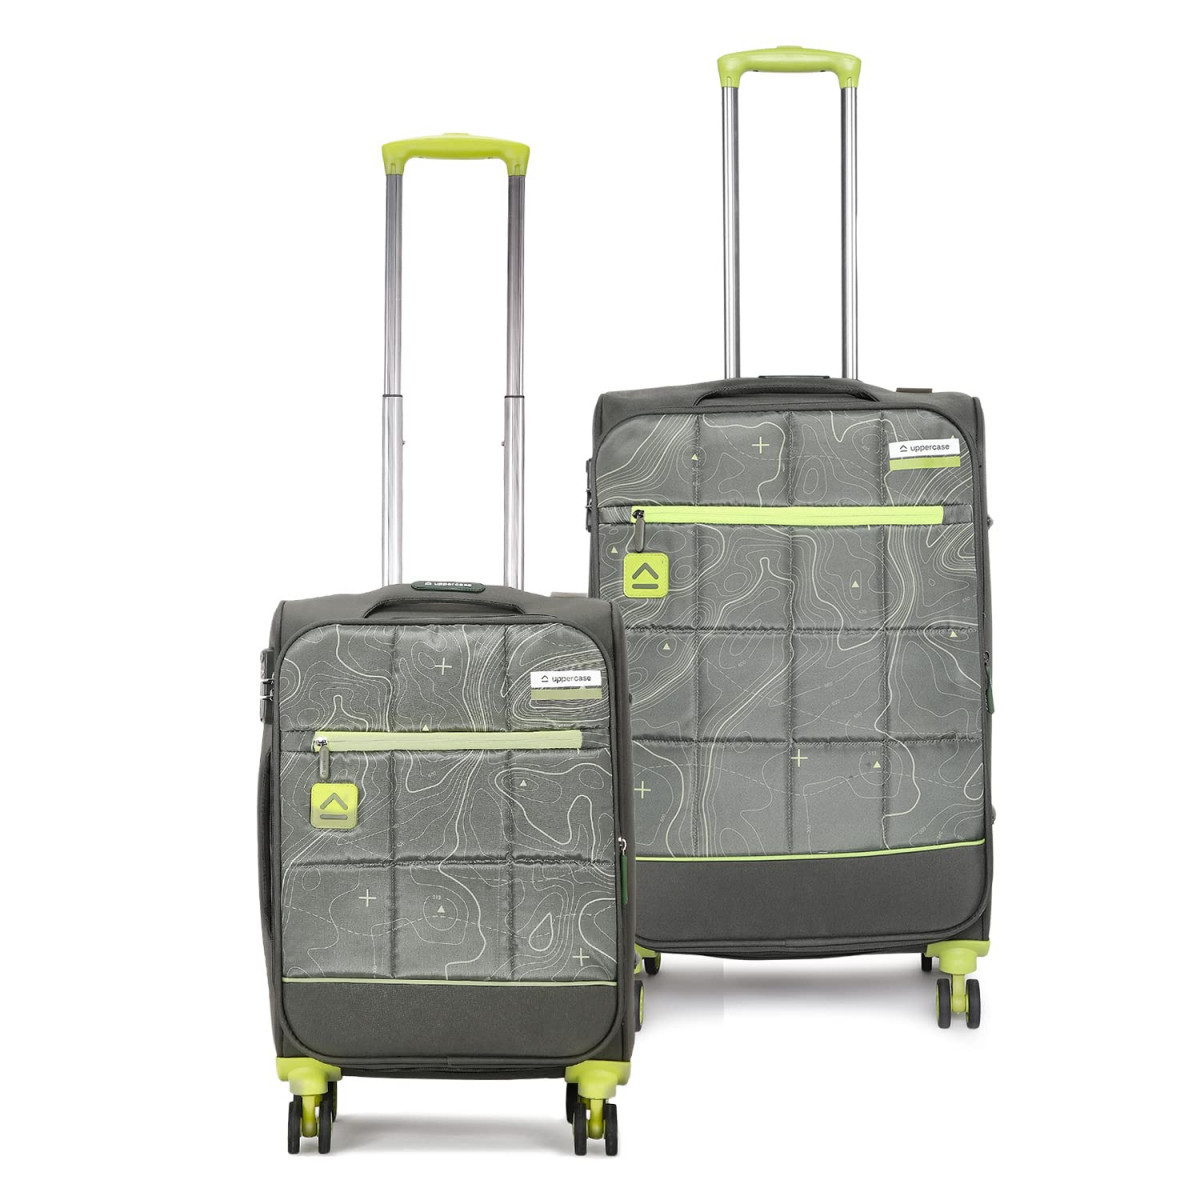 uppercase Topo Trolley Bag Set of 2 SM Sustainable Cabin  Check-in LuggageSoft Printed Luggage TSA Lock 8 Wheel Suitcase for Men  Women 2500 Days WarrantyGreen